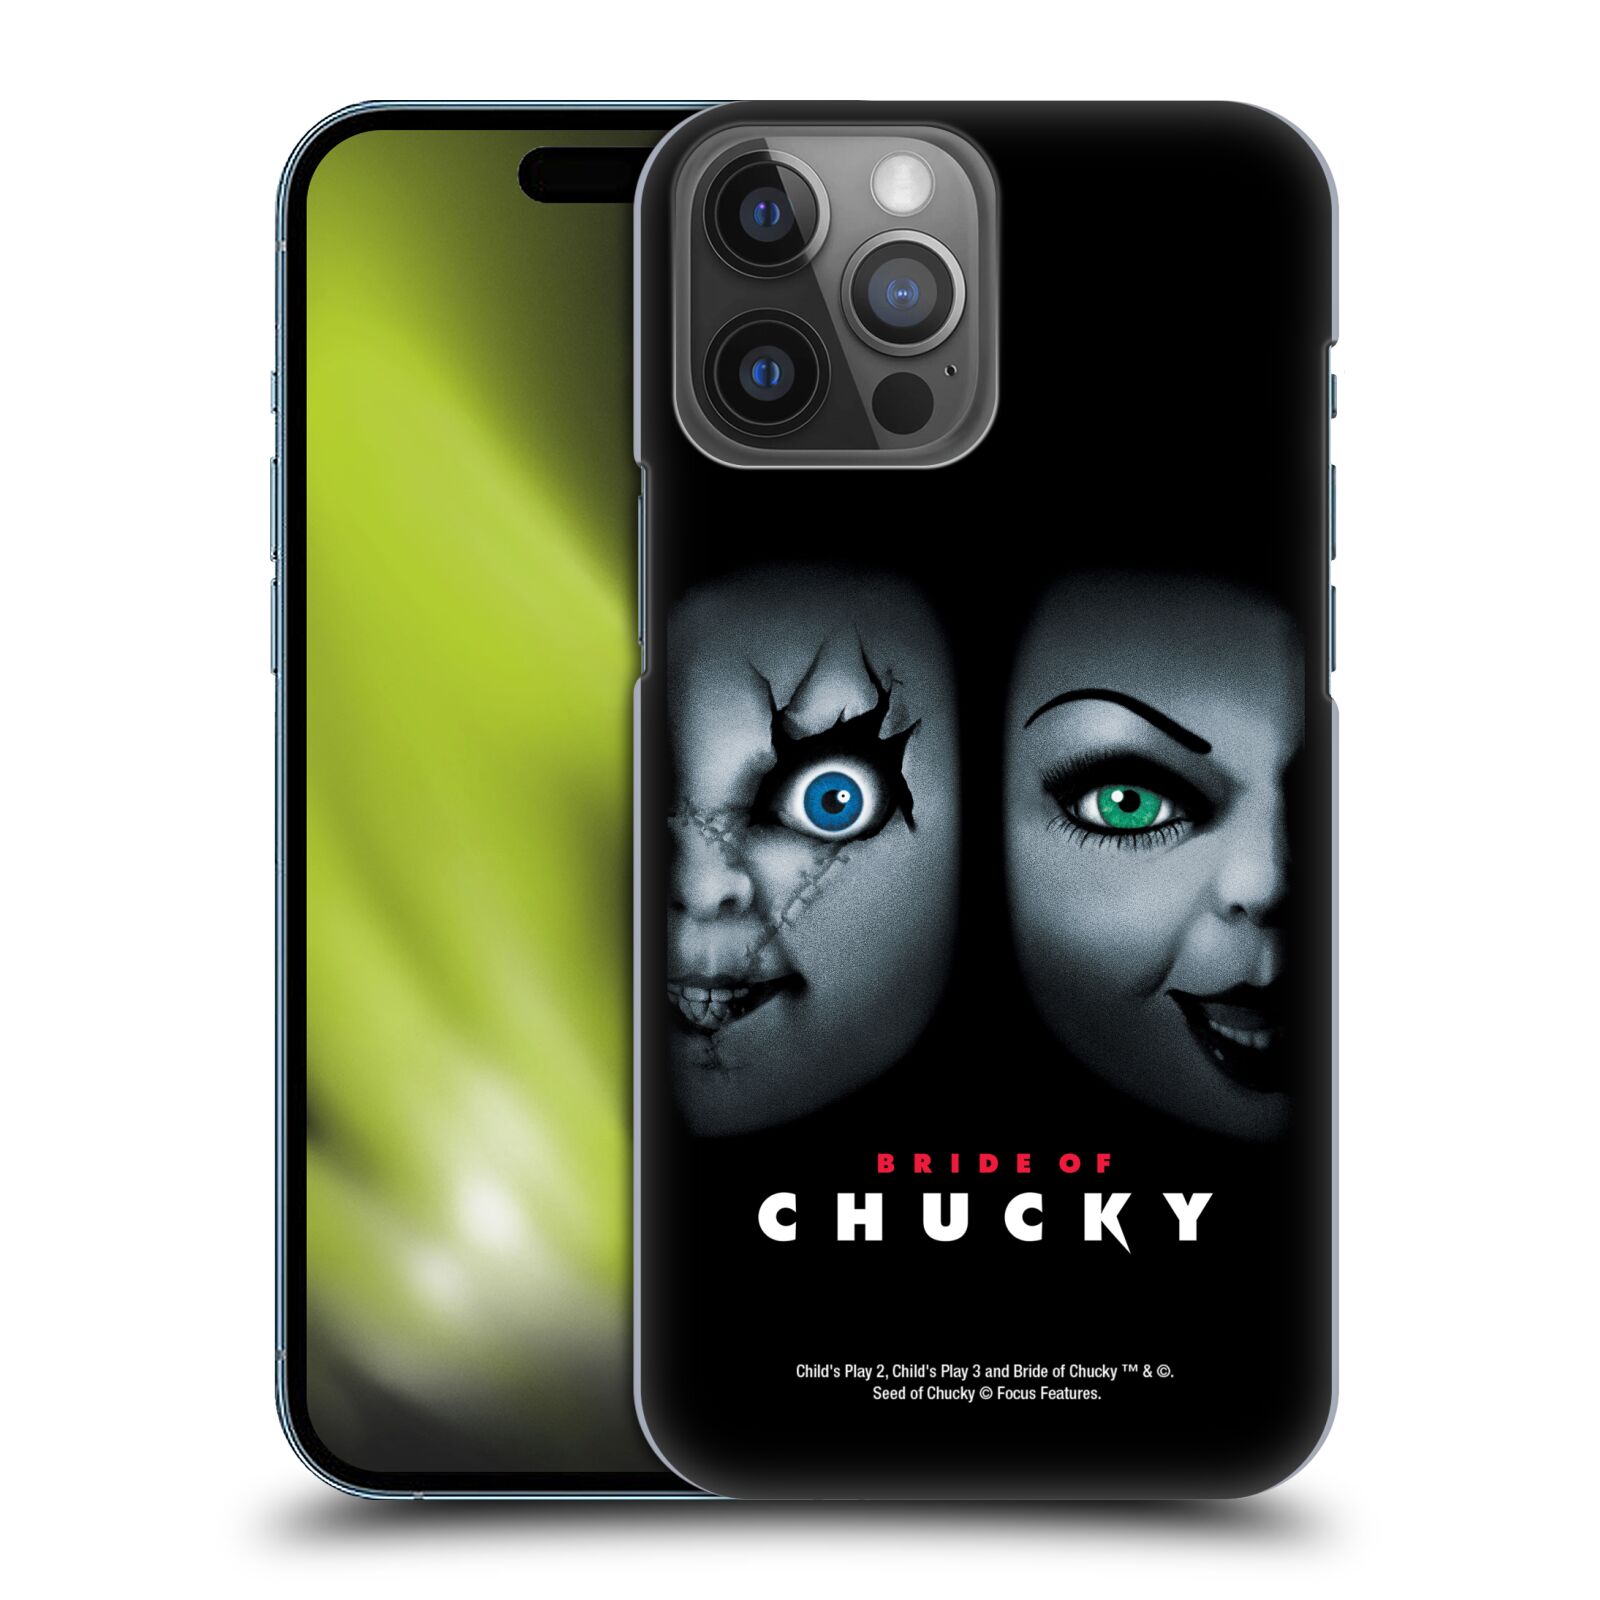 Head Case Designs Officially Licensed Bride of Chucky Key Art Poster Hard Back Case Compatible with Apple iPhone 14 Pro Max - image 1 of 7